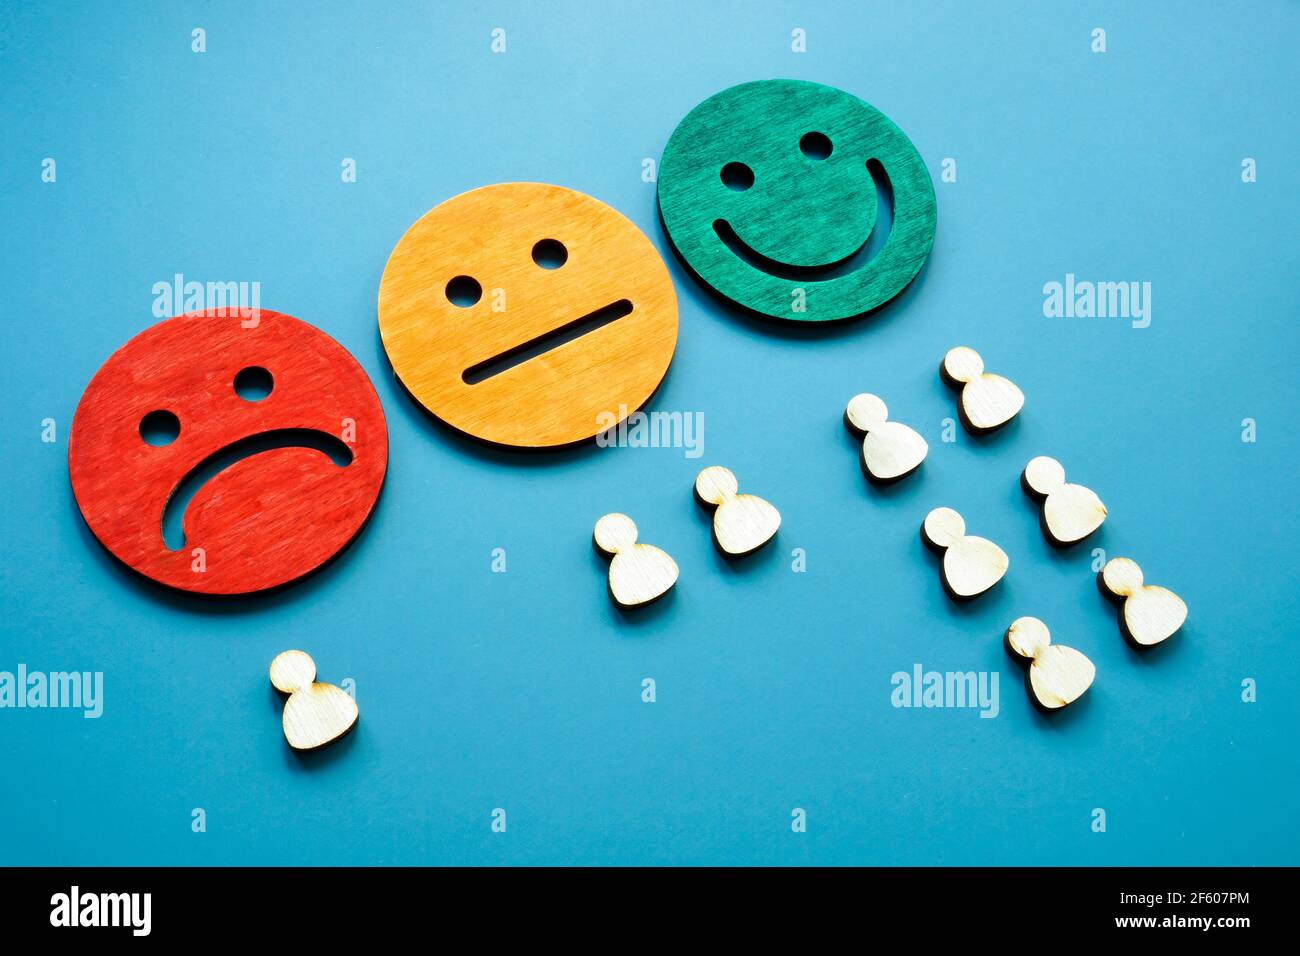 Customer satisfaction survey concept. Smile faces and figures. Stock Photo